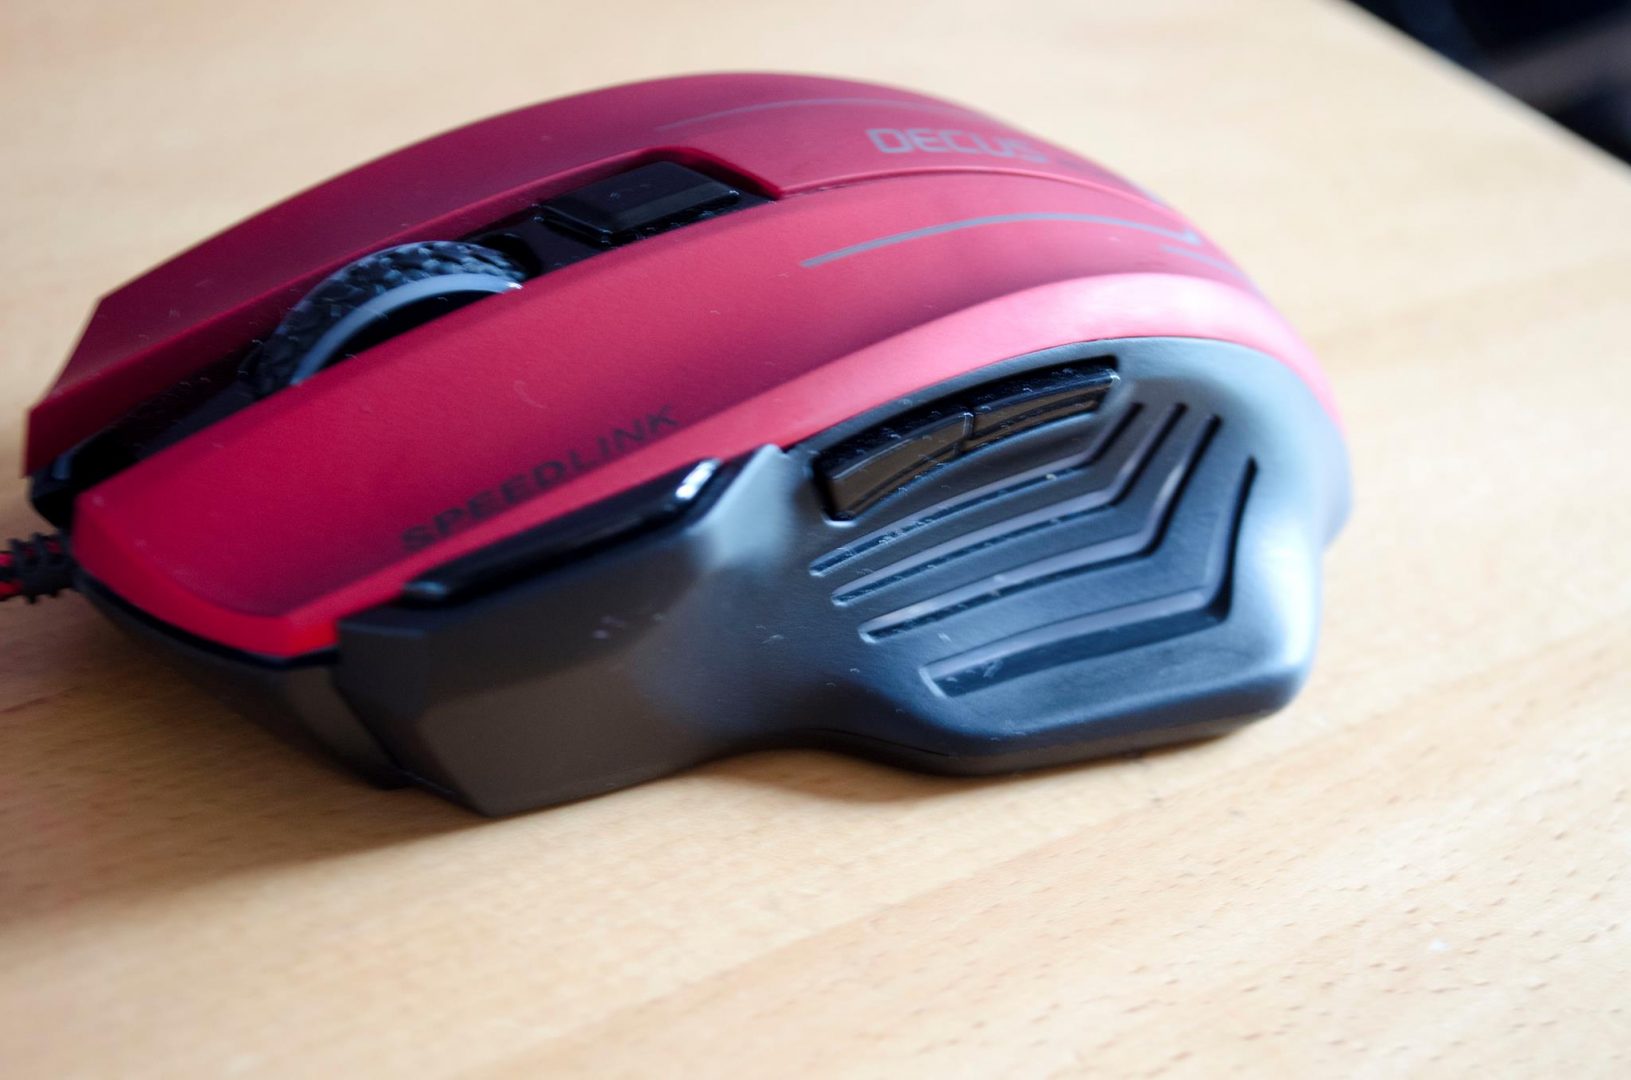 How To Download Decus Respec Gaming Mouse App On Windows 10